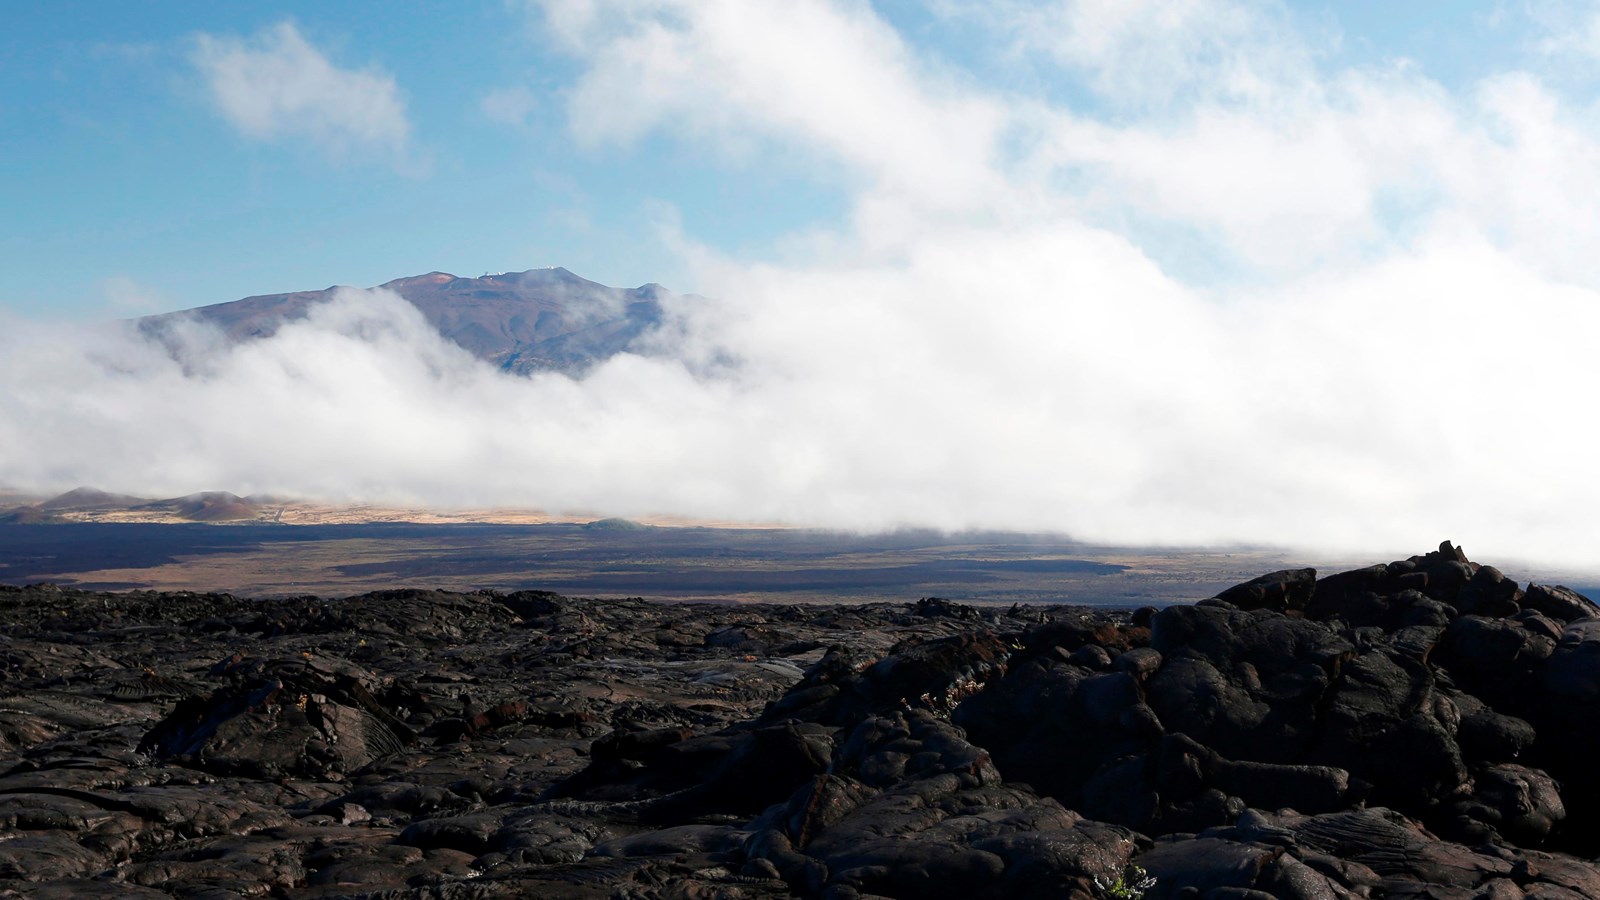 Black lava fields with a distant mountain obscured by clouds. 